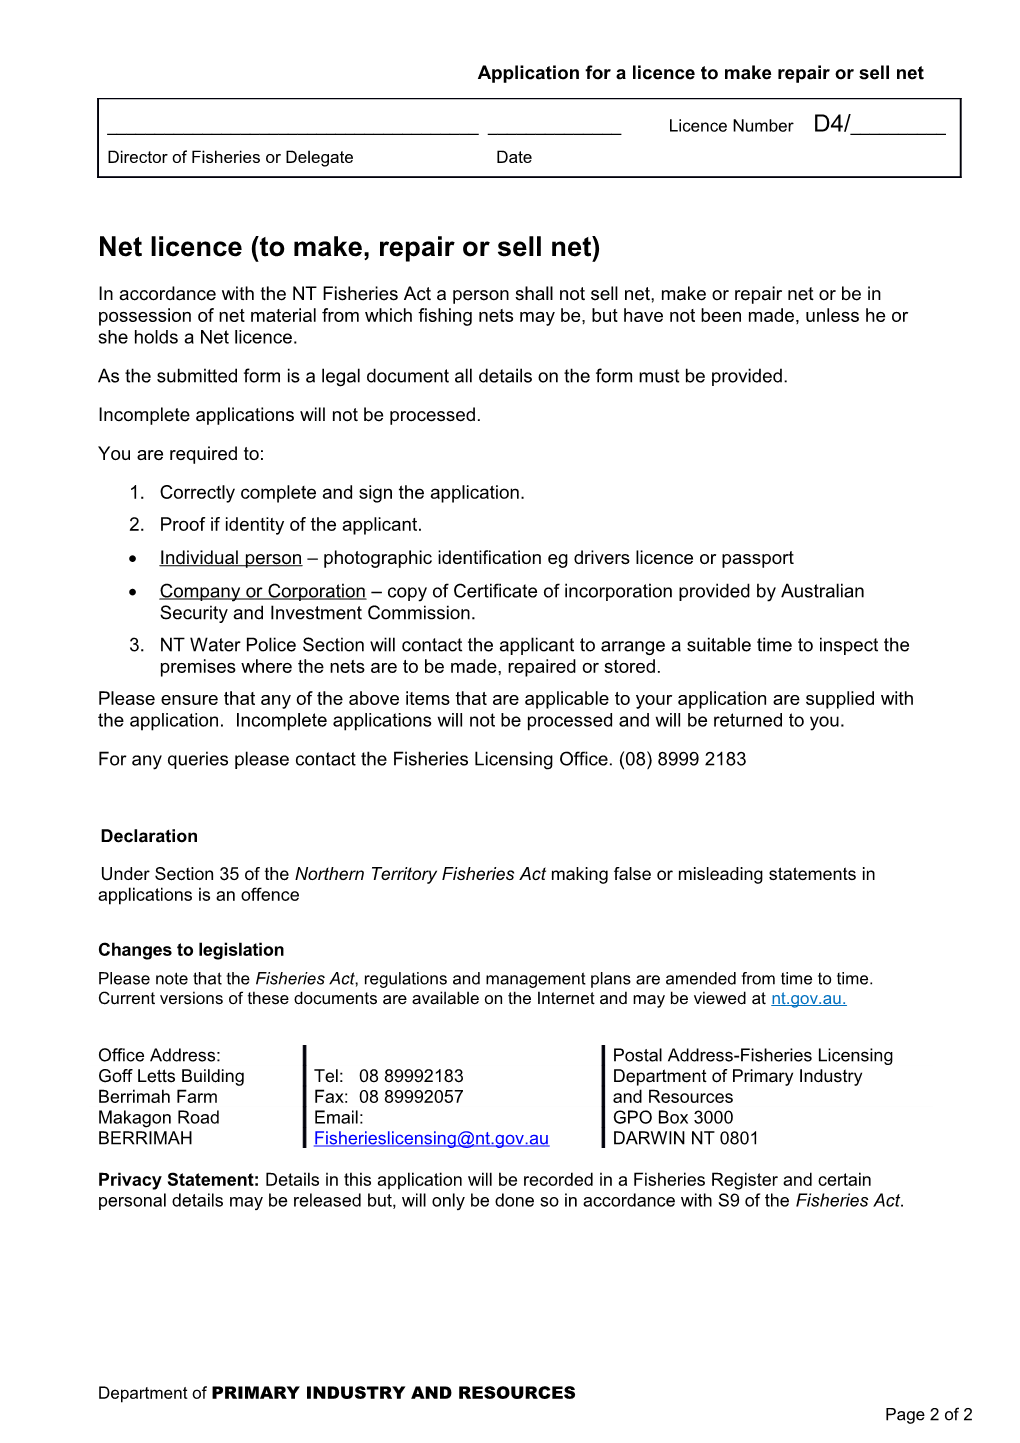 Application for a Licence to Make Repair Or Sell Net